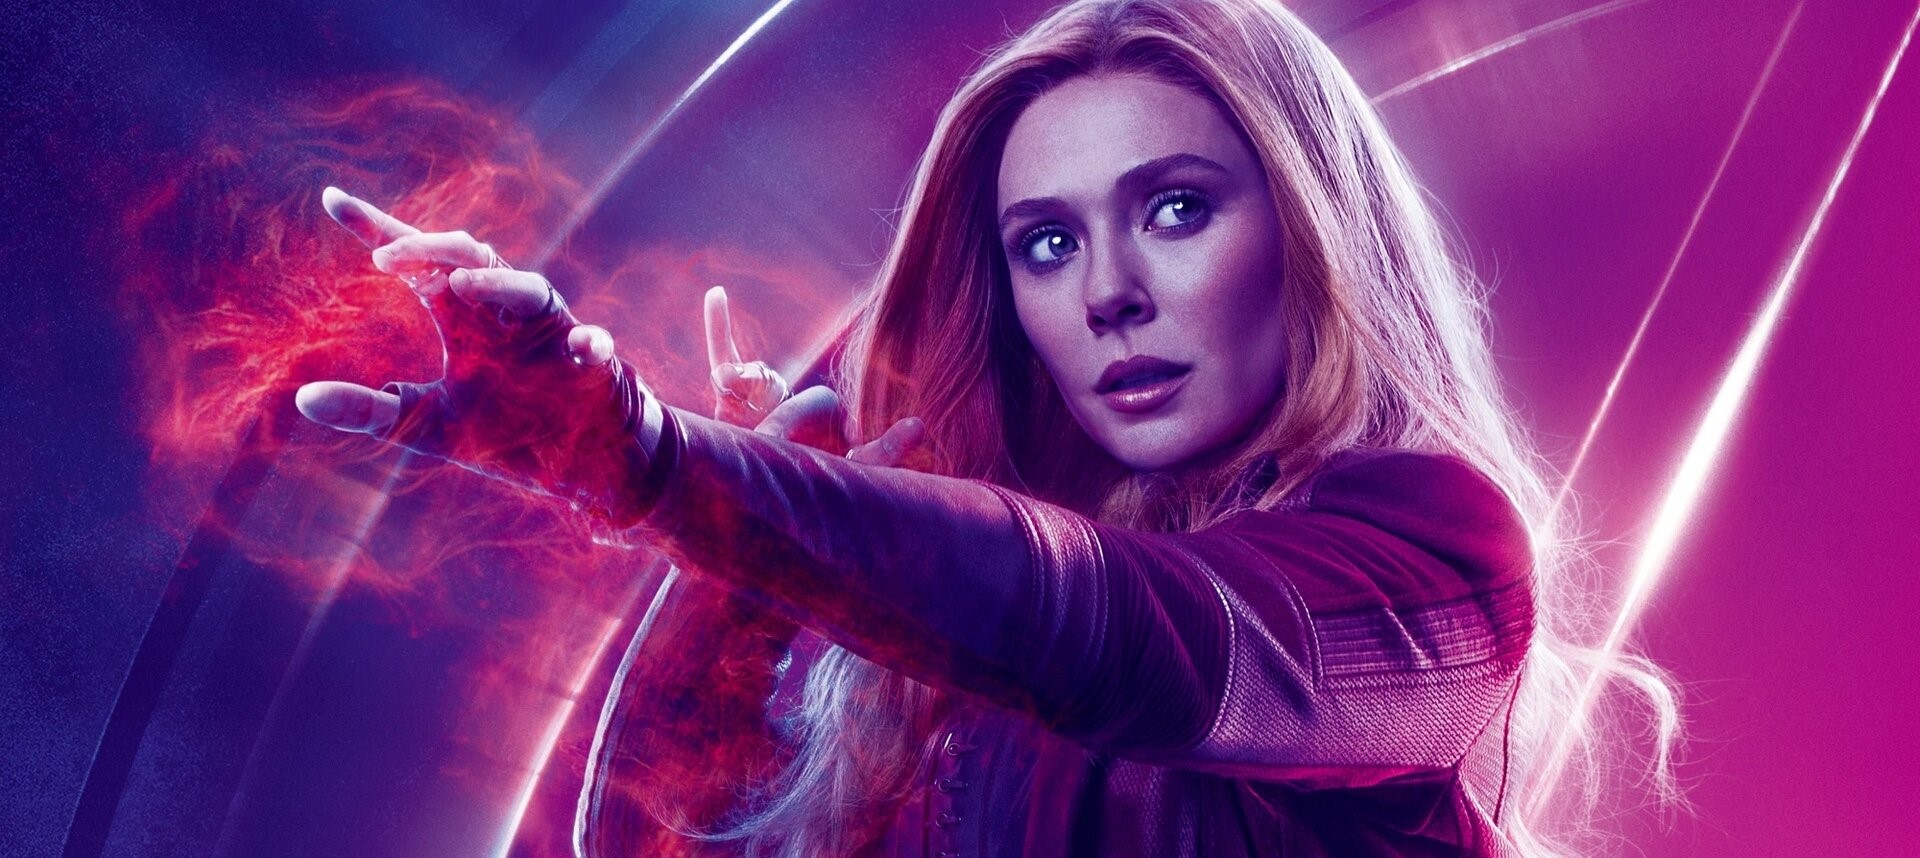 elizabeth-olsen-says-wandavision-will-explore-why-her-character-is-known-as-scarlet-witch-social.jpg